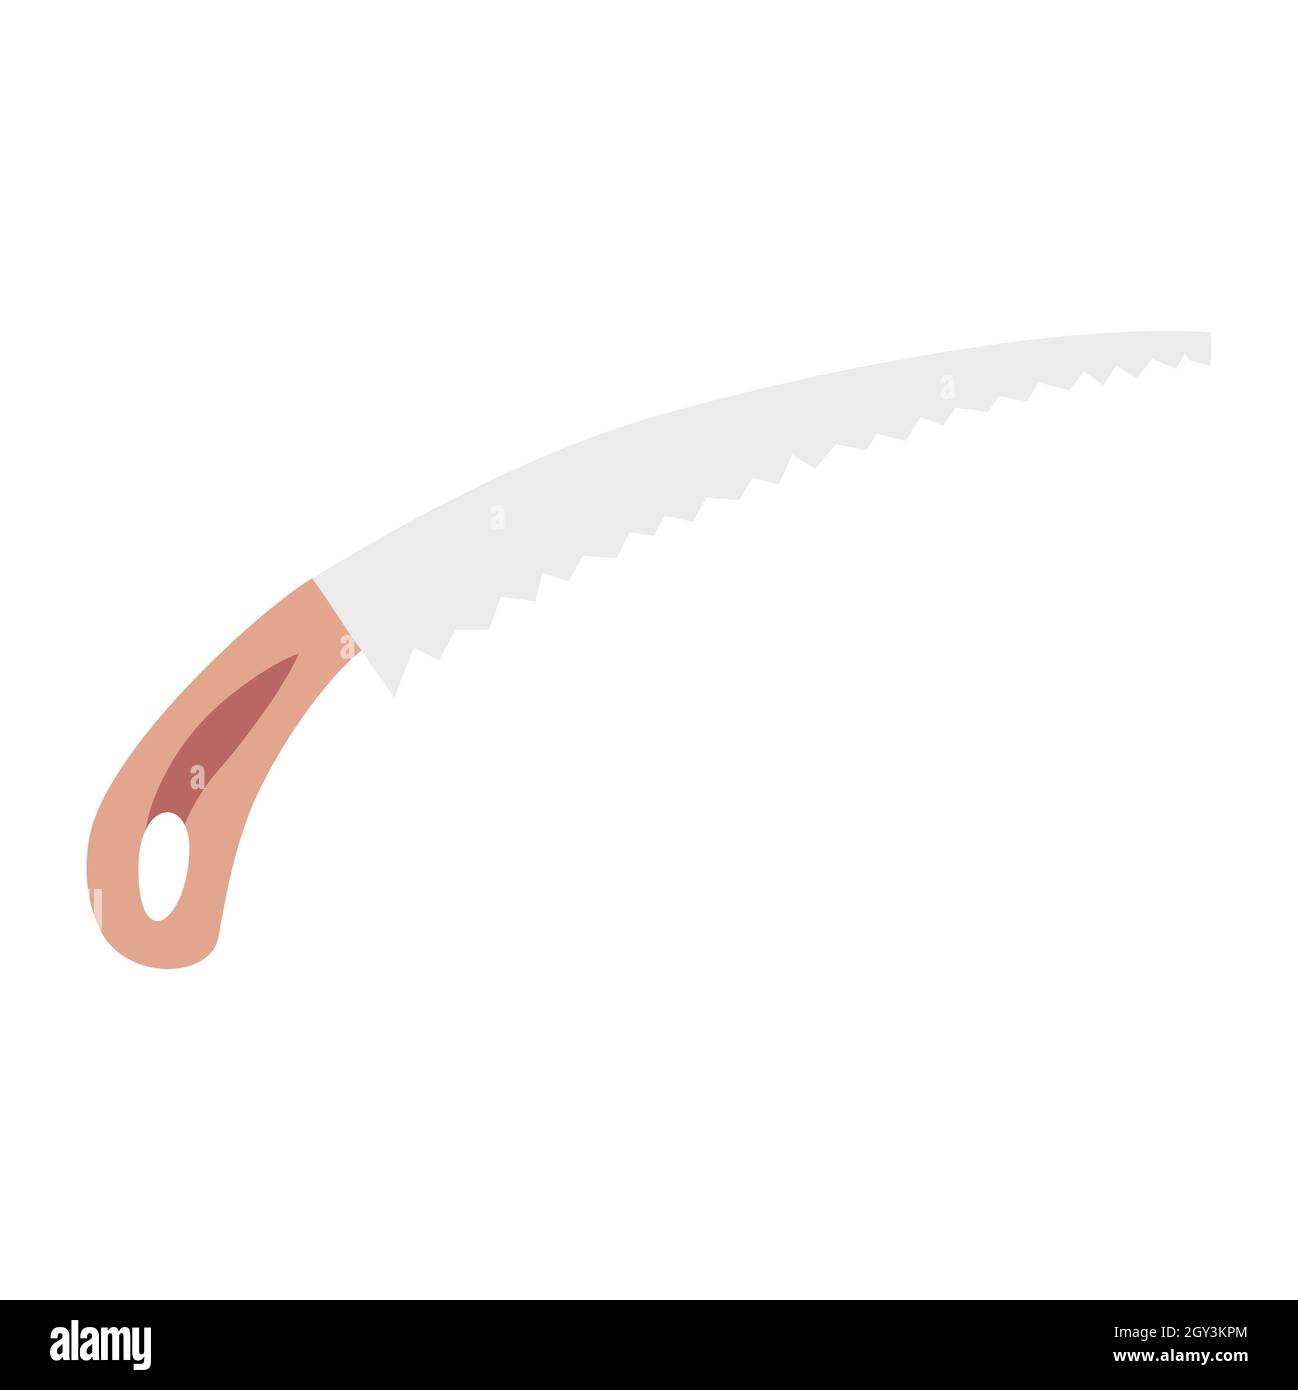 flat design illustration of a wood saw with brown algae vector illustrations Stock Vector